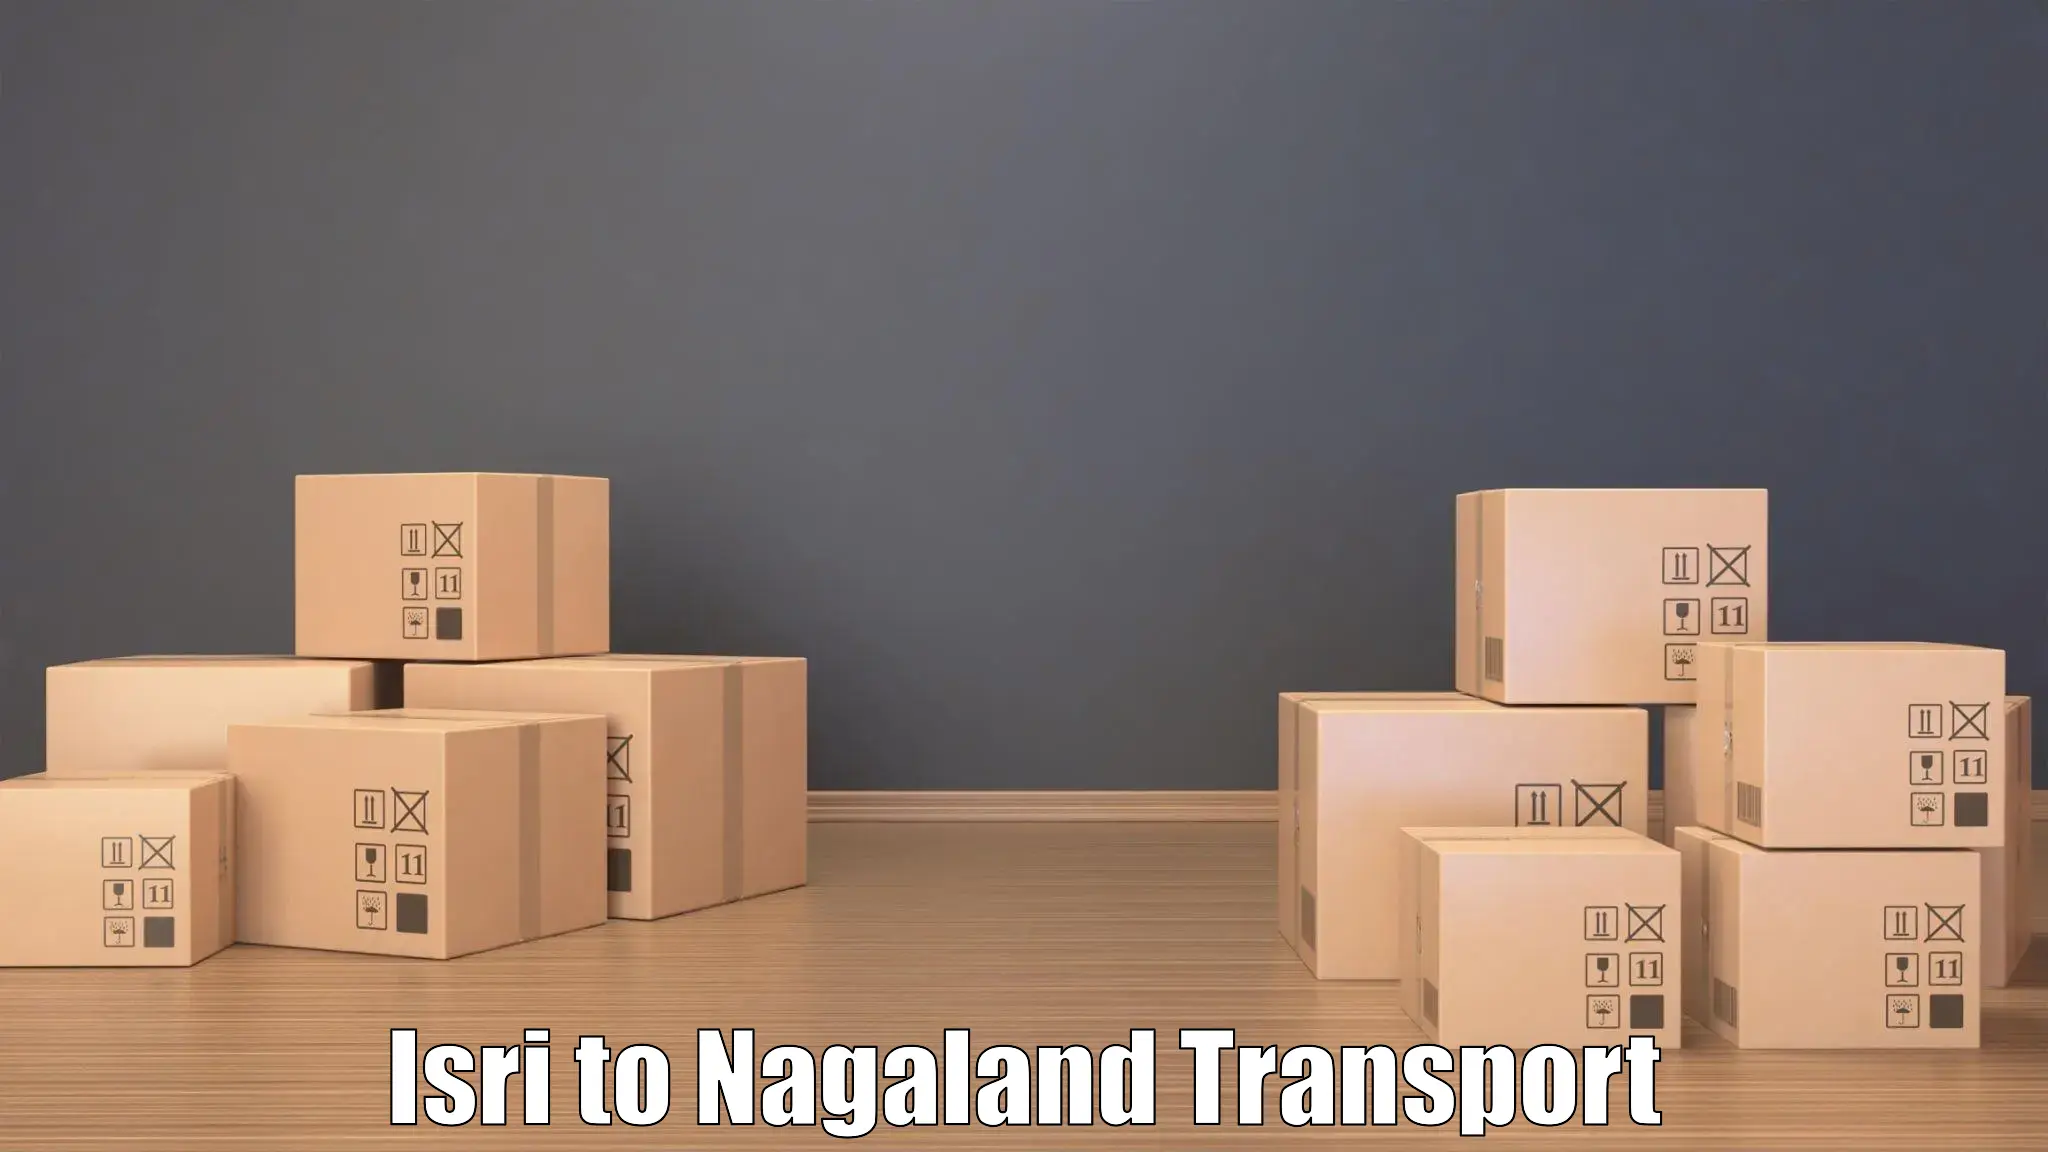 Land transport services in Isri to Nagaland